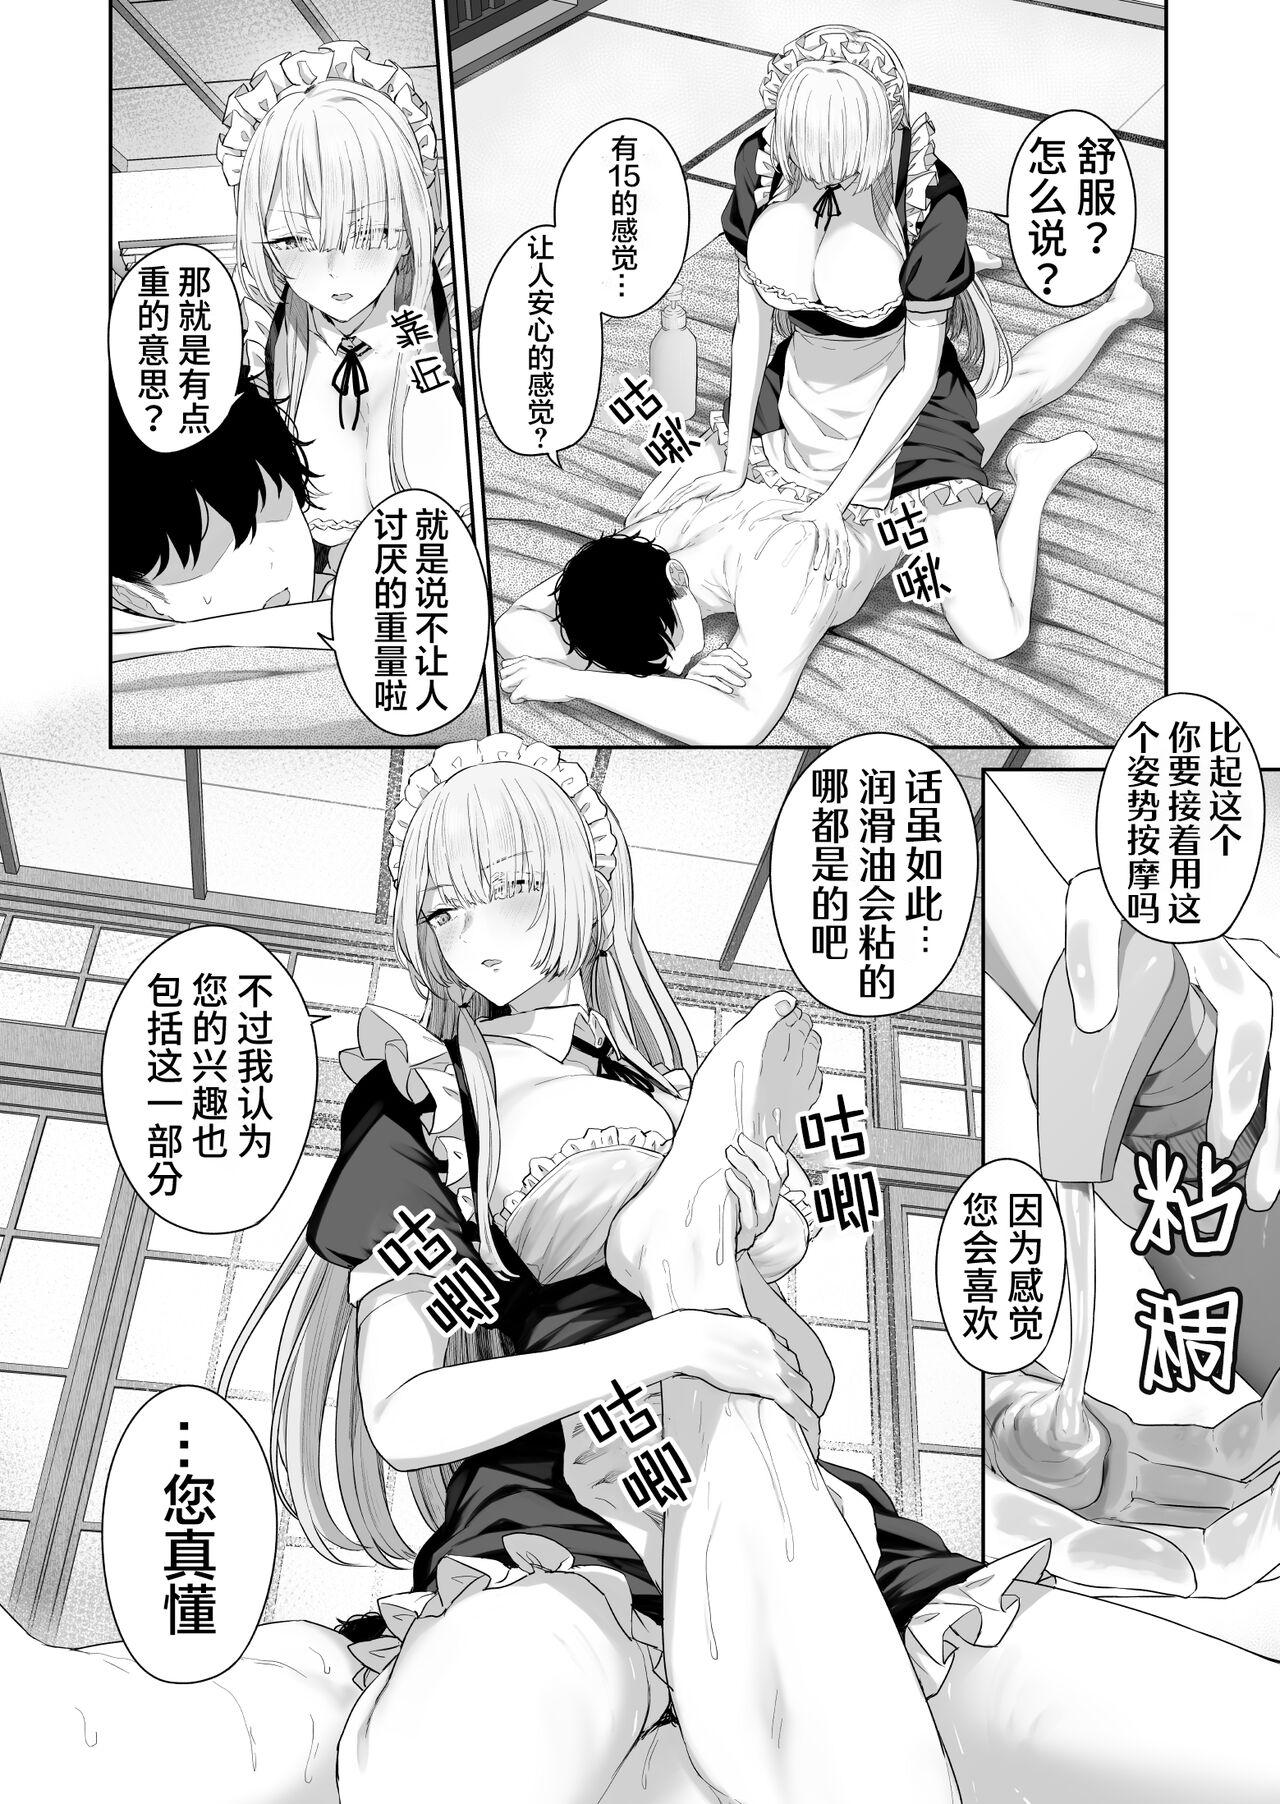 Pussylick AK15の進捗1 - Girls frontline Girl - Page 5